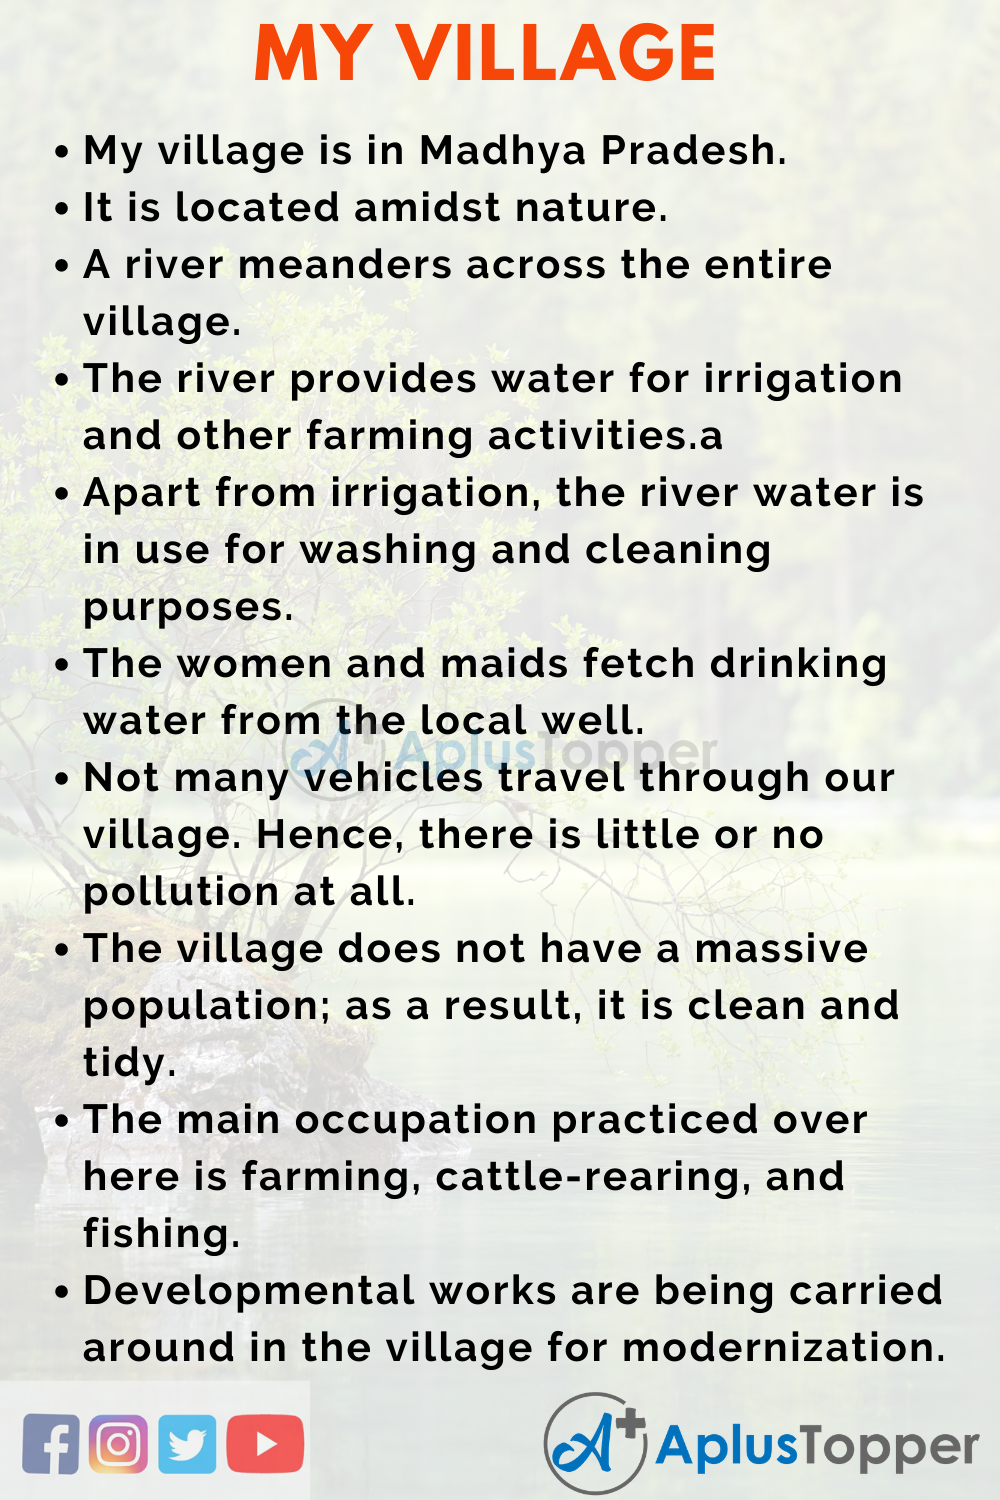 agriculture in my village essay